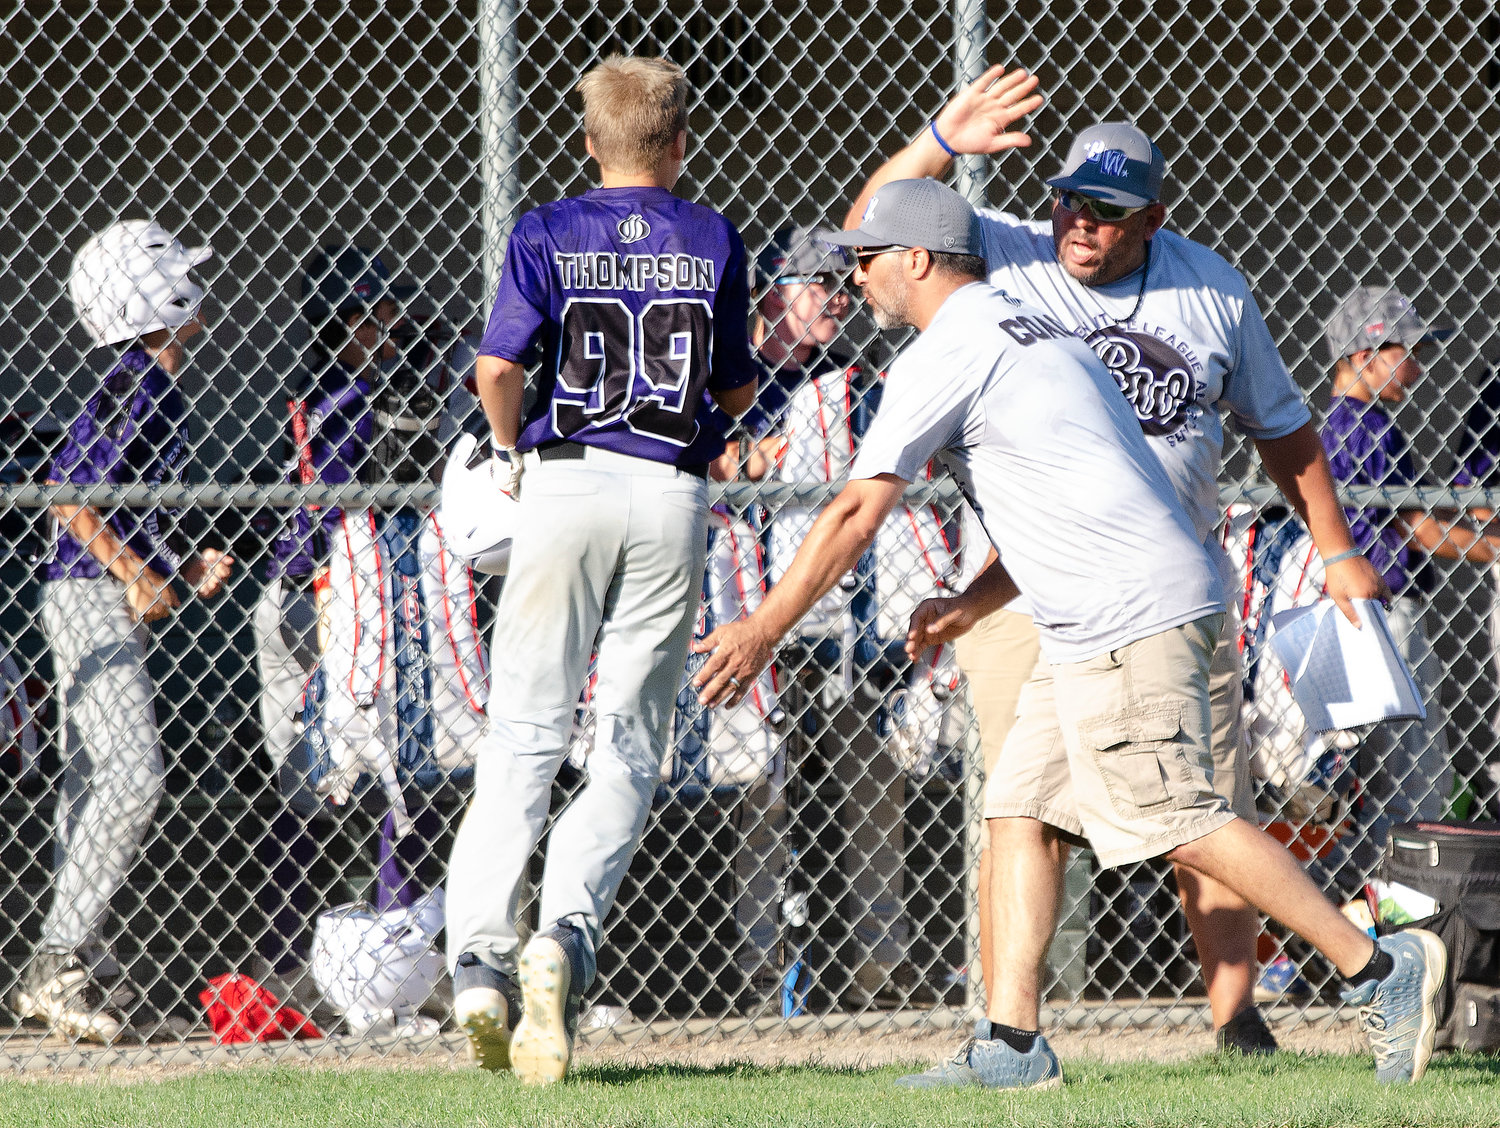 Ryan Thompson (left) celebrates after scoring the second run in the second inning with coach Steve Furtado (right) and another coach.